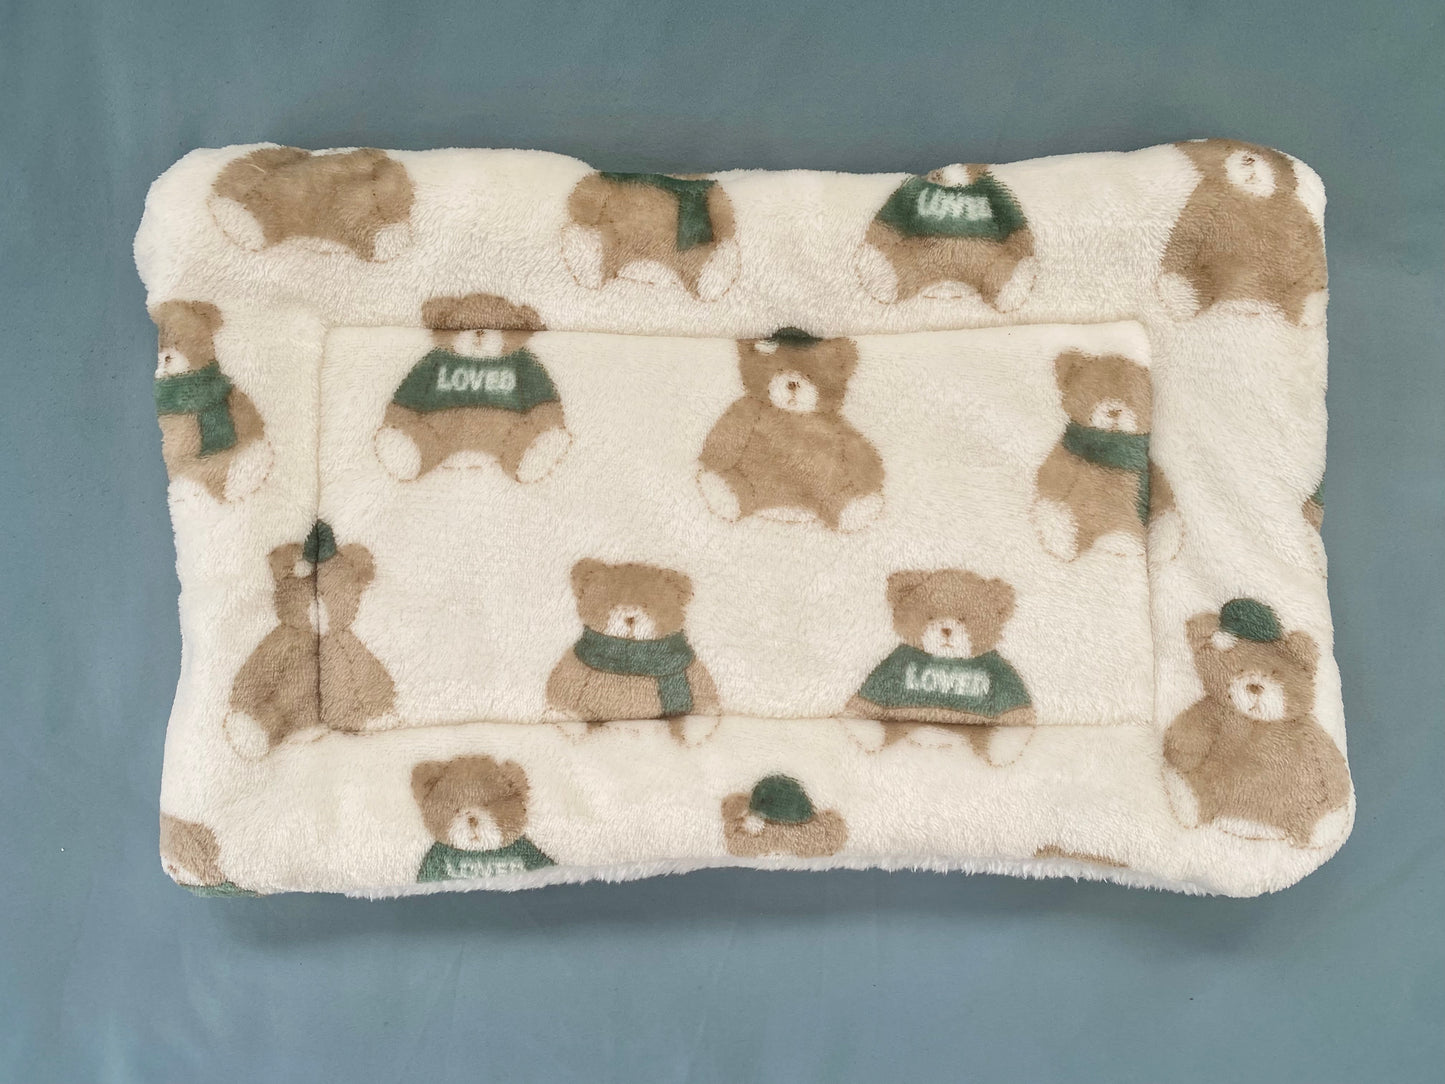 Bunny bed with teddy bear pattern 🧸